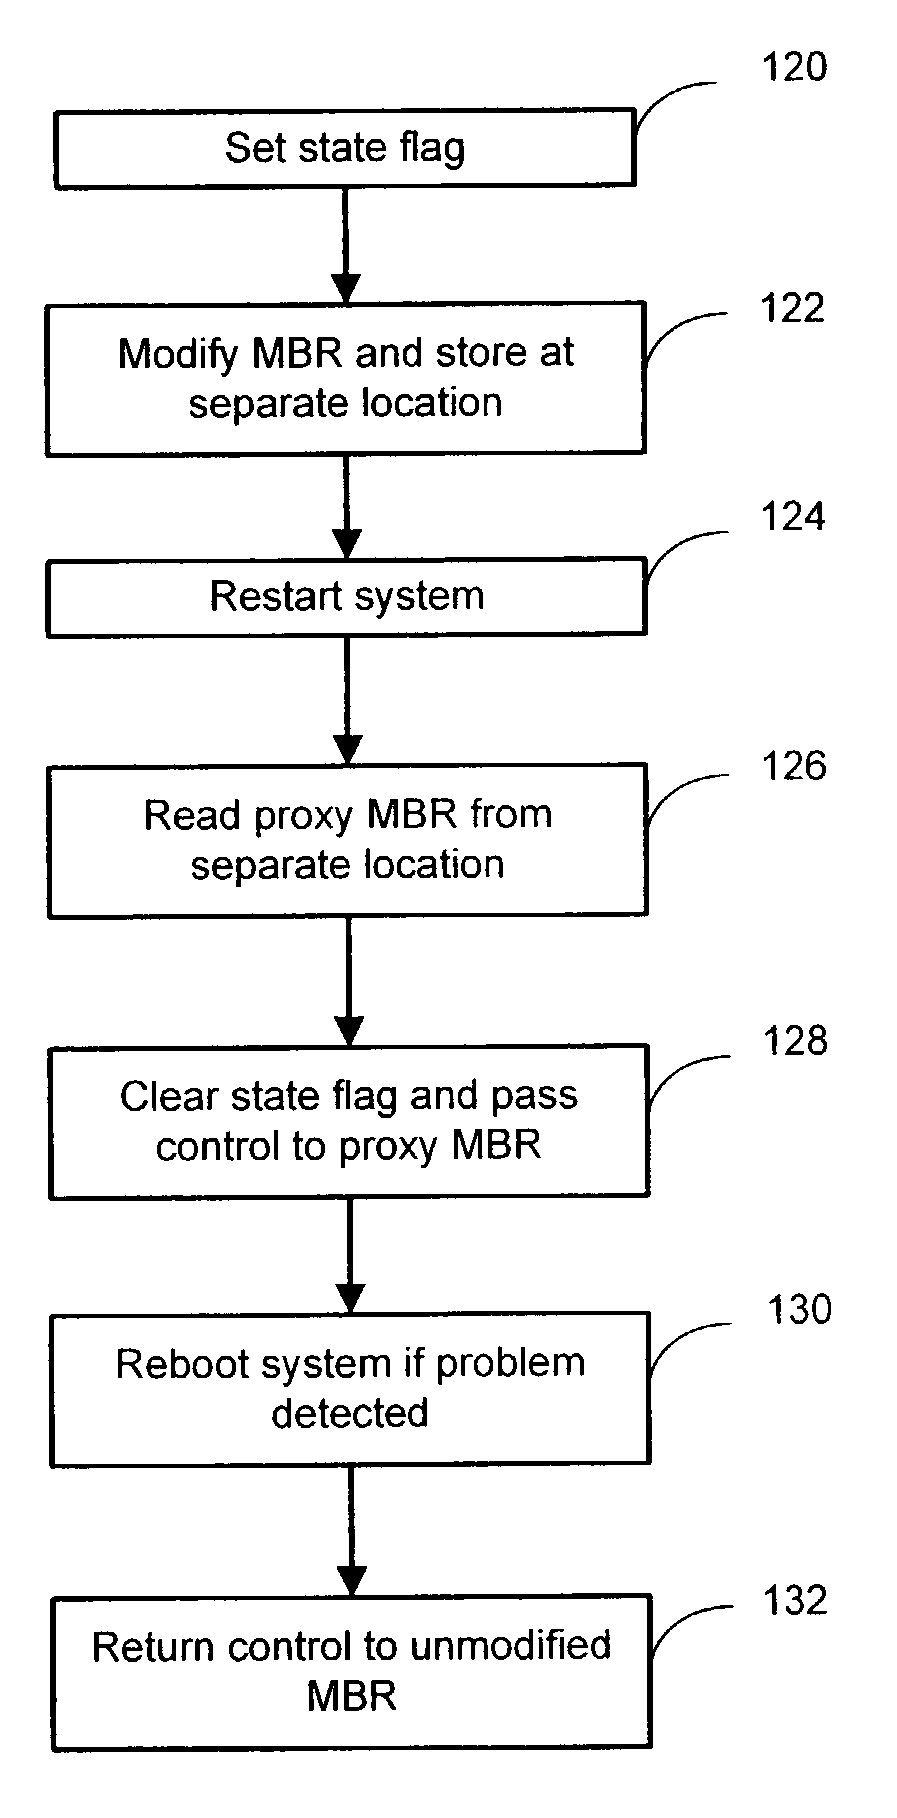 Method and system for detection and correction of entrance into an improper MBR state in a computer system